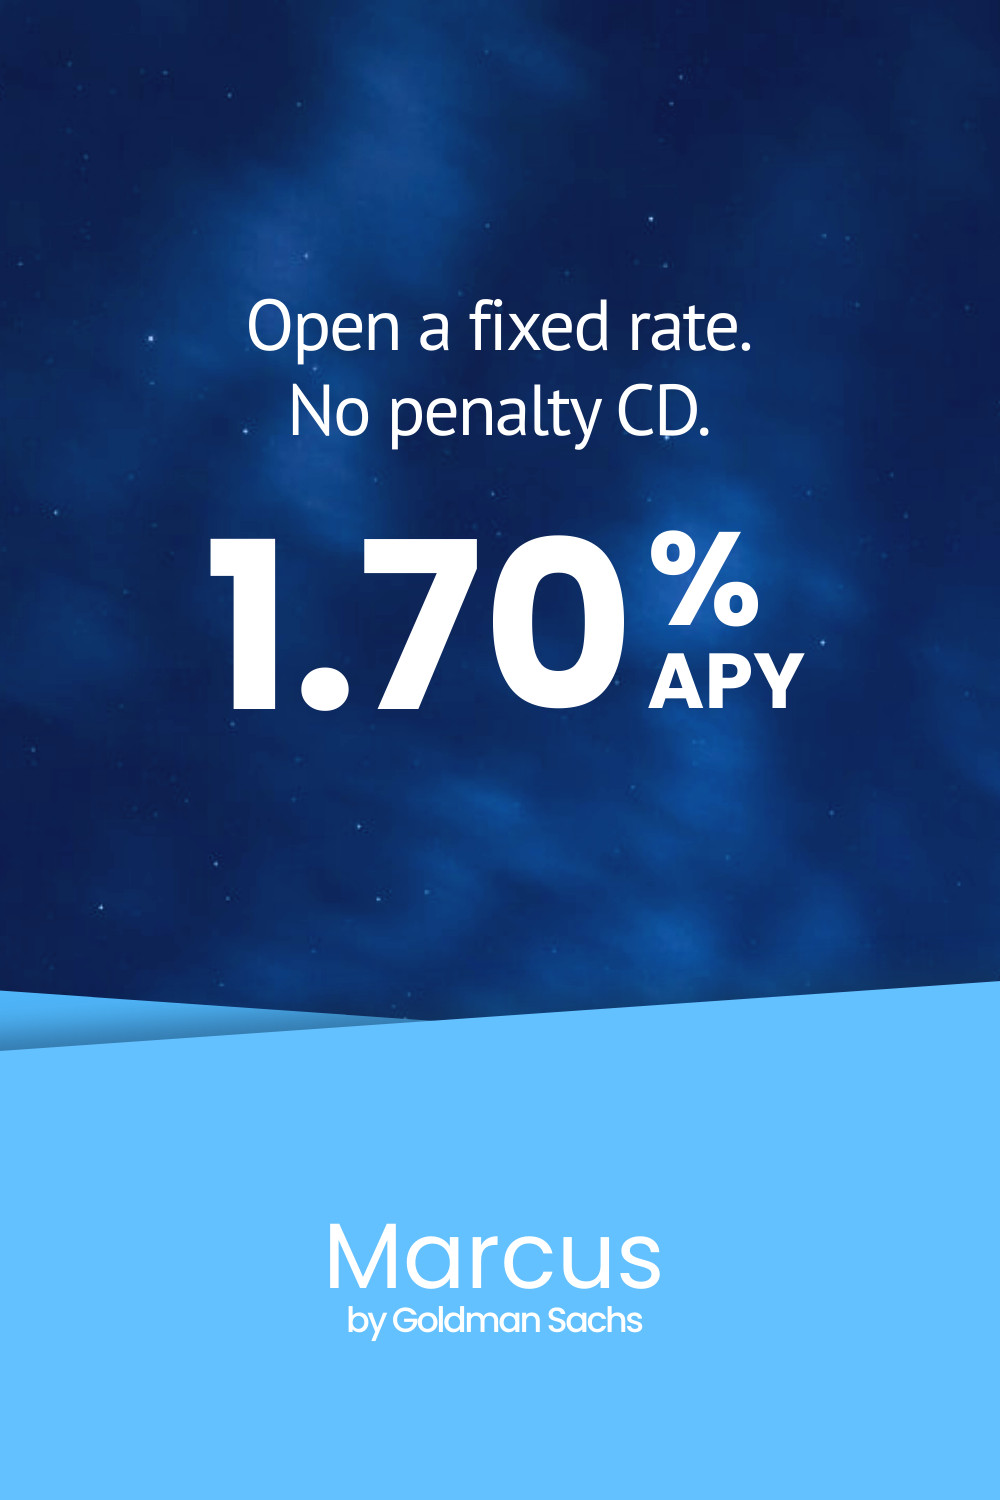 Marcus Fixed Rate Blue Finance